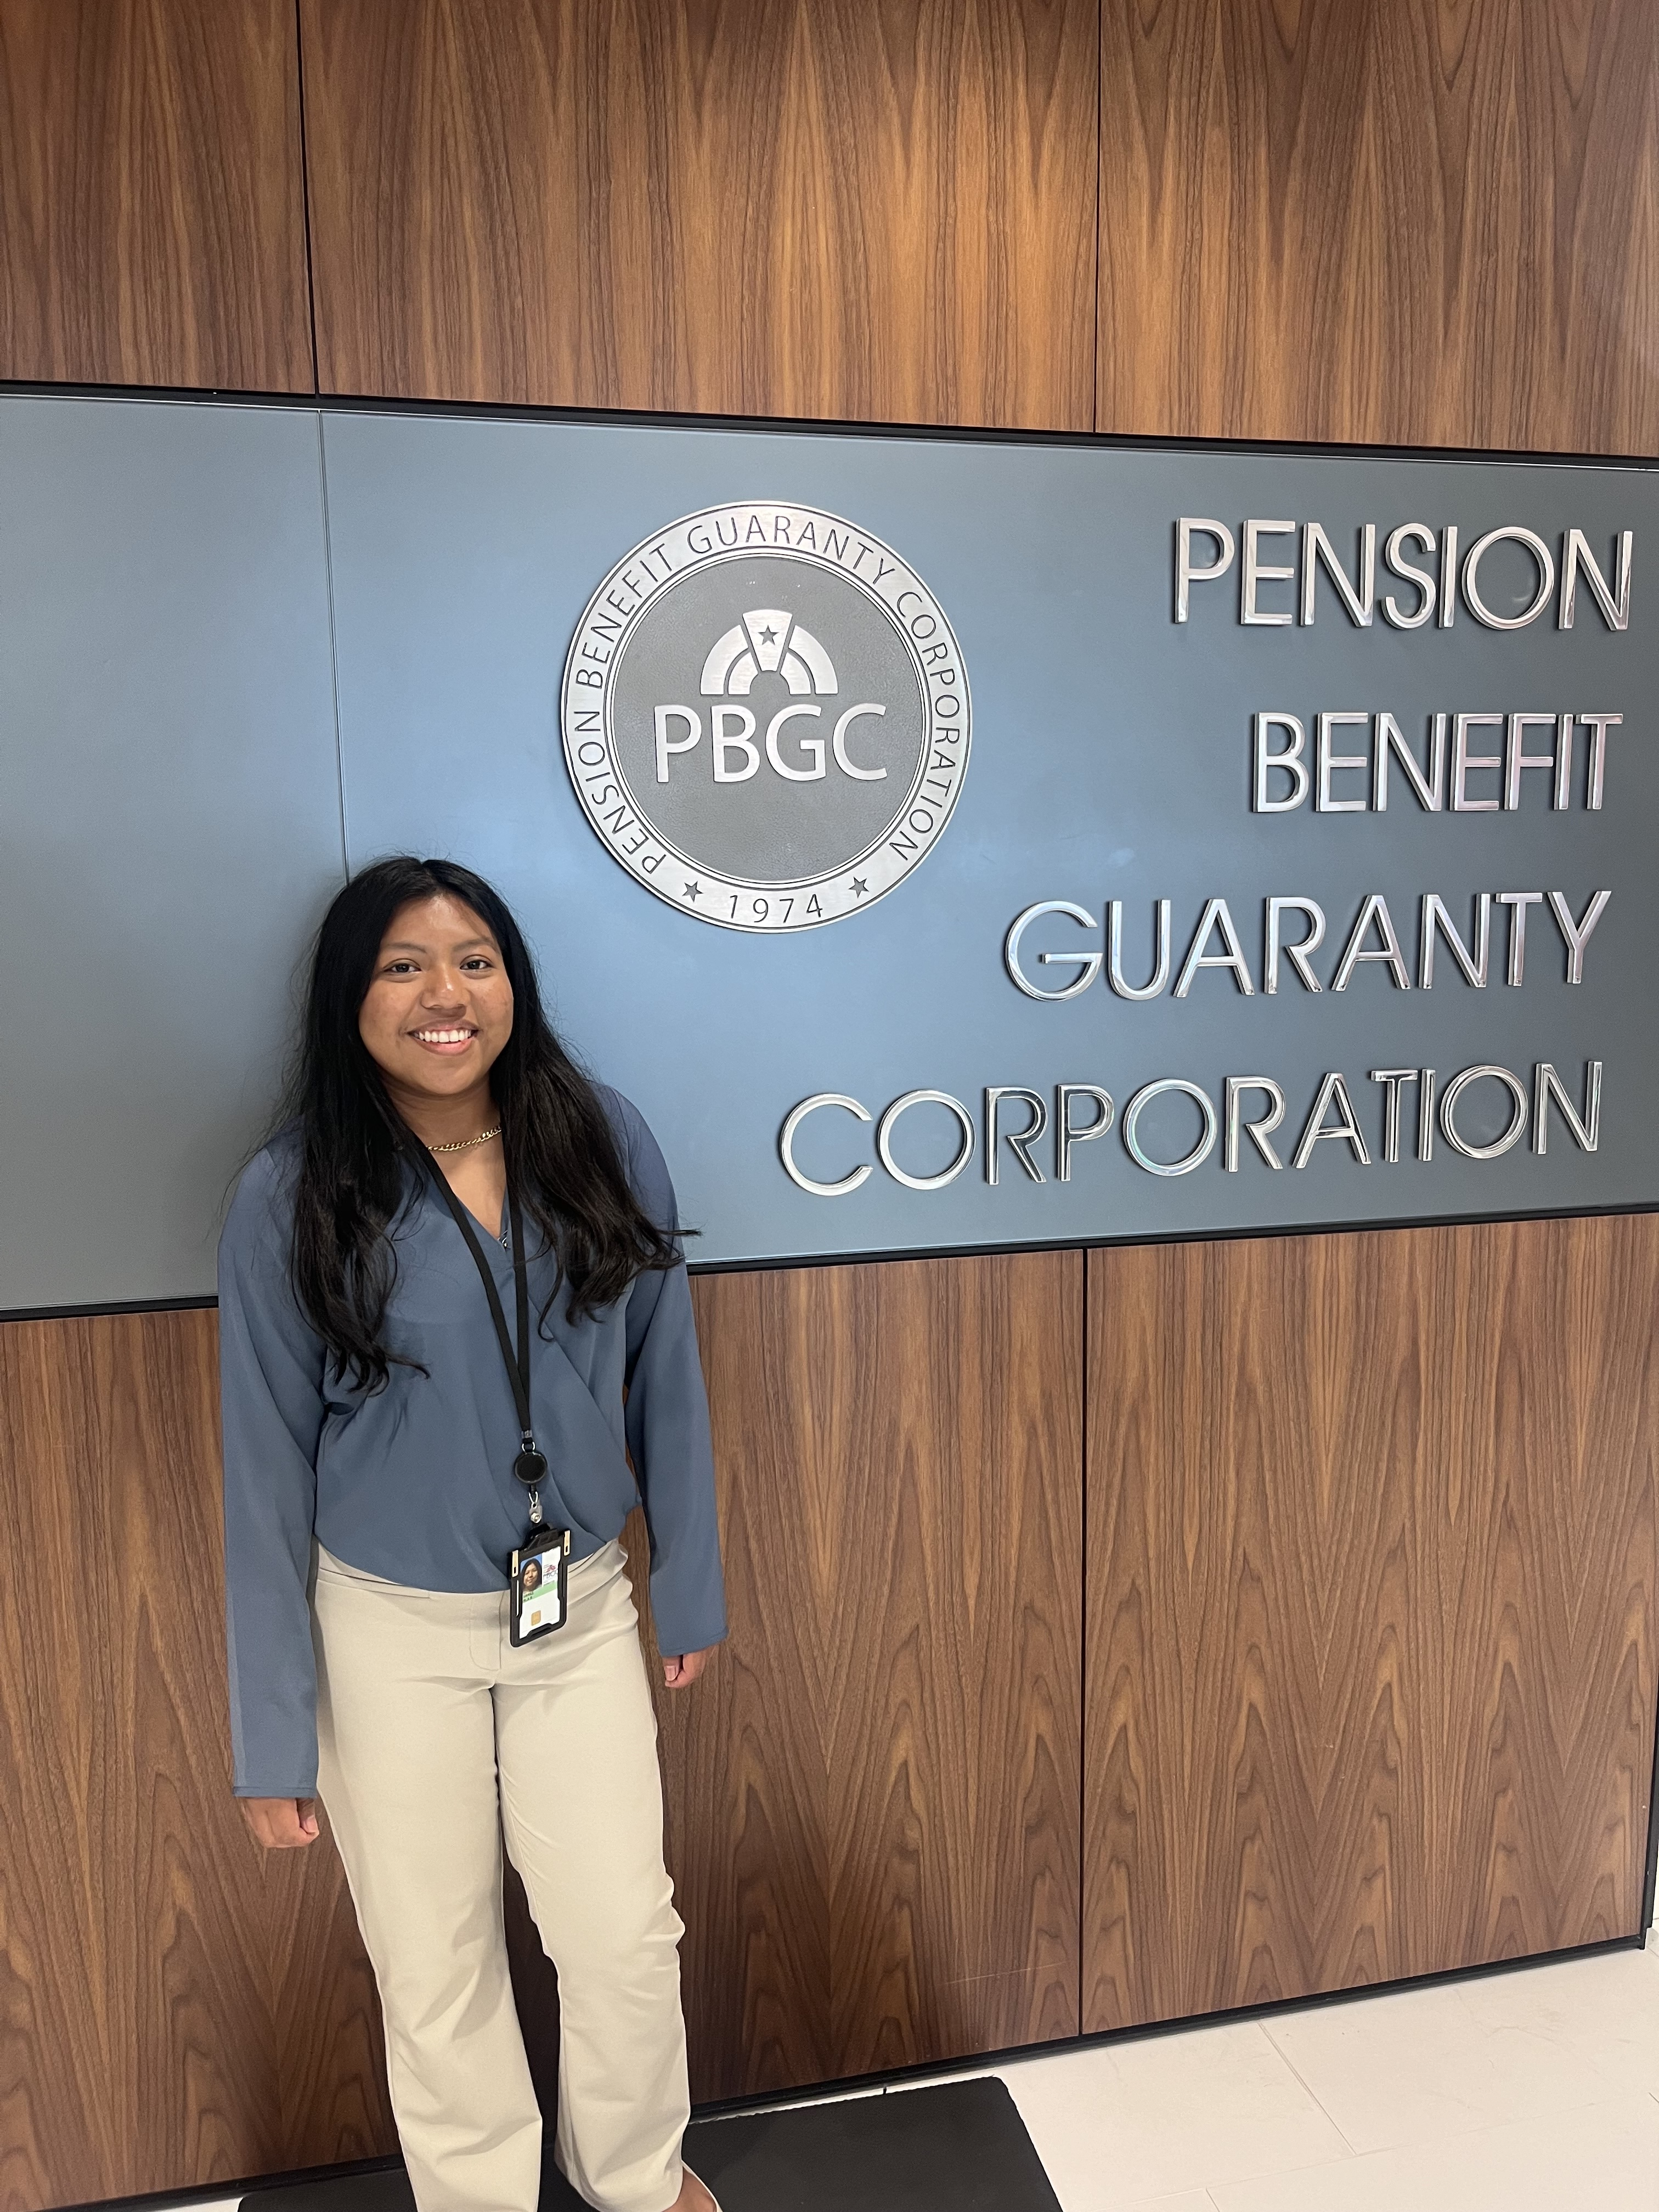 Perla Alvarez stands in front of the pension benefit guaranty corporation sign